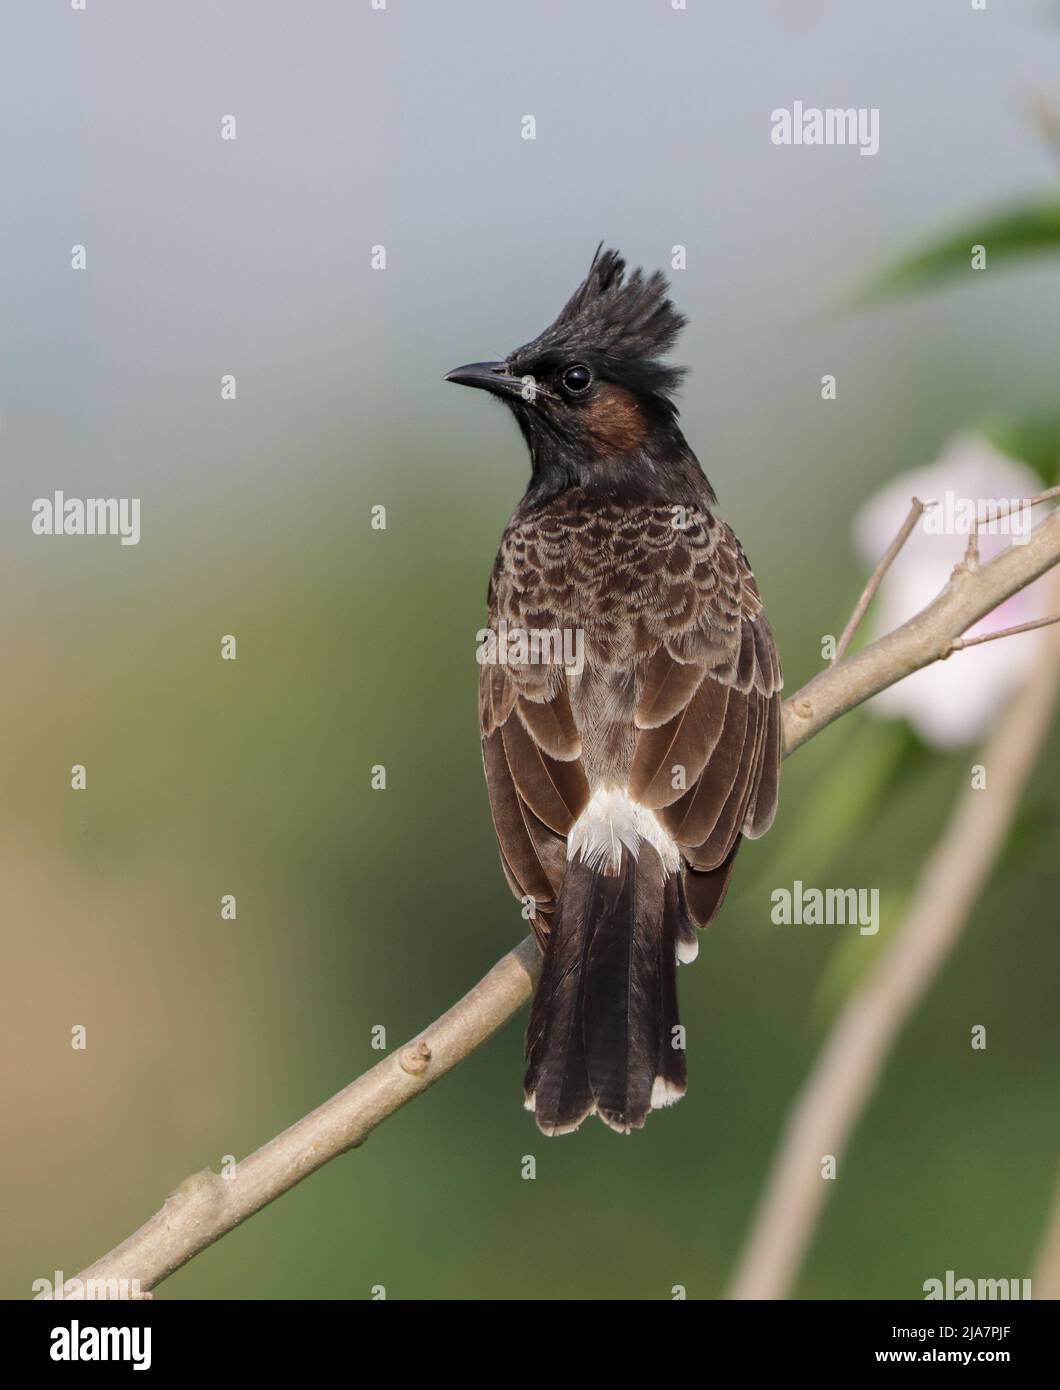 The red-vented bulbul is a member of the bulbul family of passerines. It is a resident breeder across the Indian subcontinent, including Sudan extendi Stock Photo